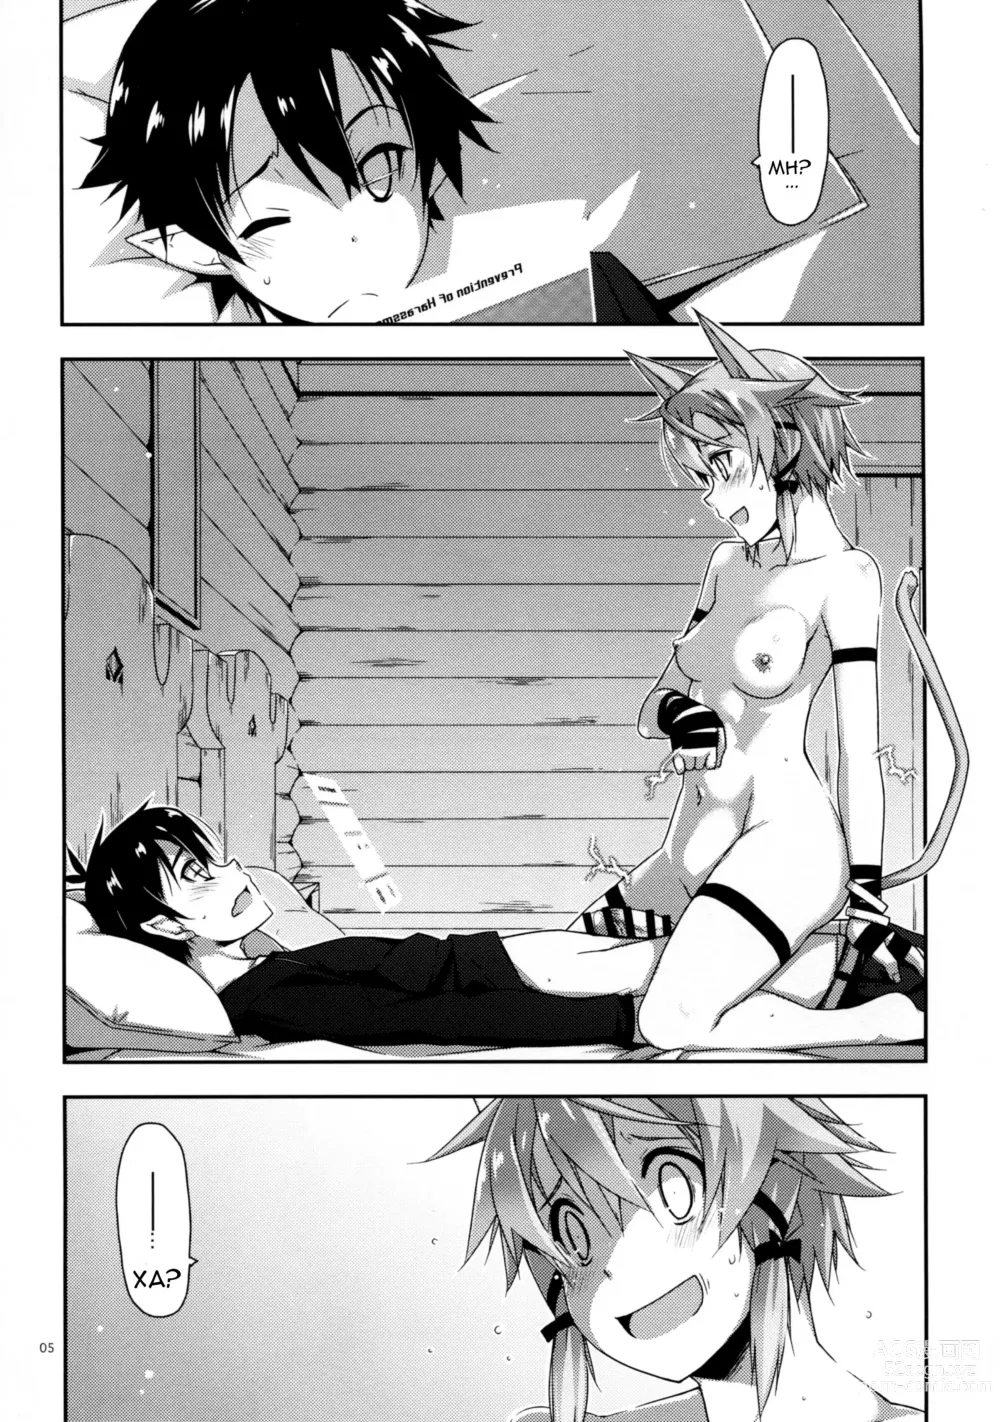 Page 5 of doujinshi Case closed.